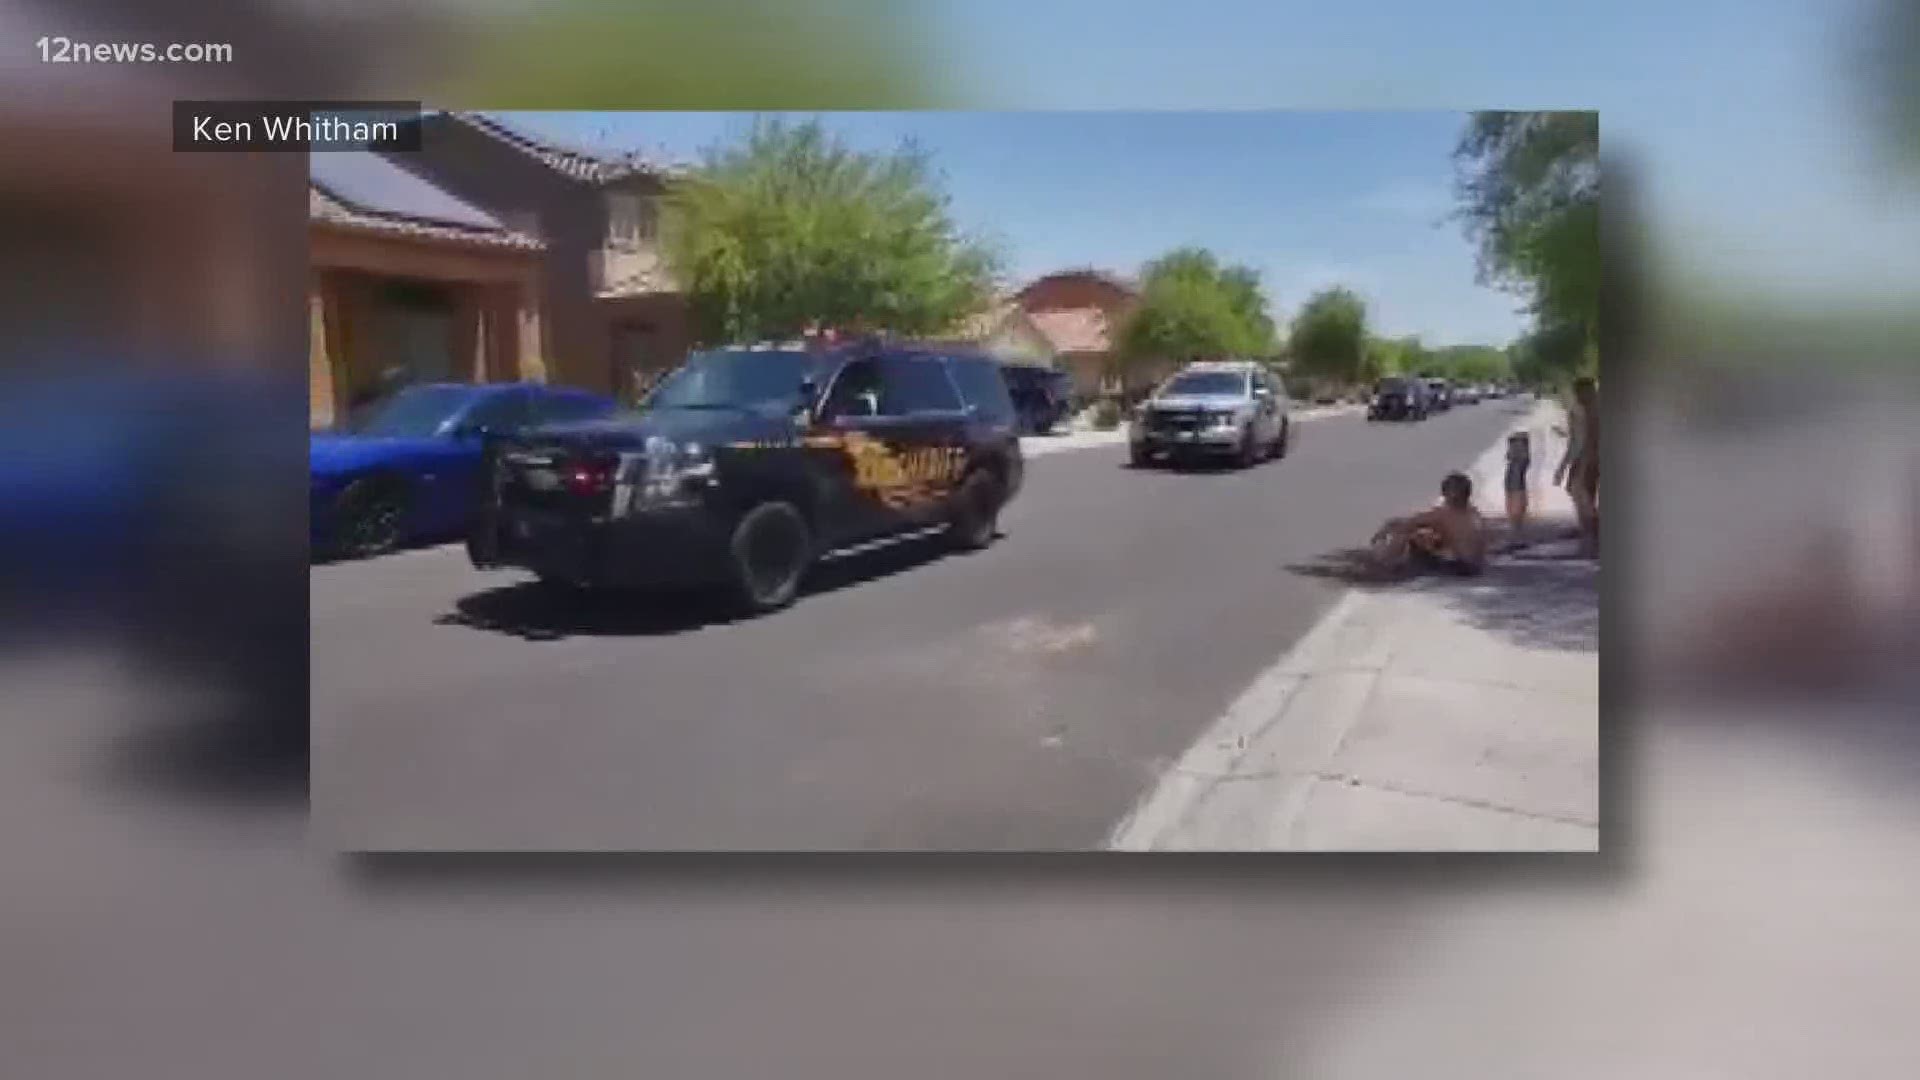 Deputies with the Maricopa County Sheriff’s Office, troopers from Arizona Department of Public Safety and Arizona Rangers paraded down the boy’s street.